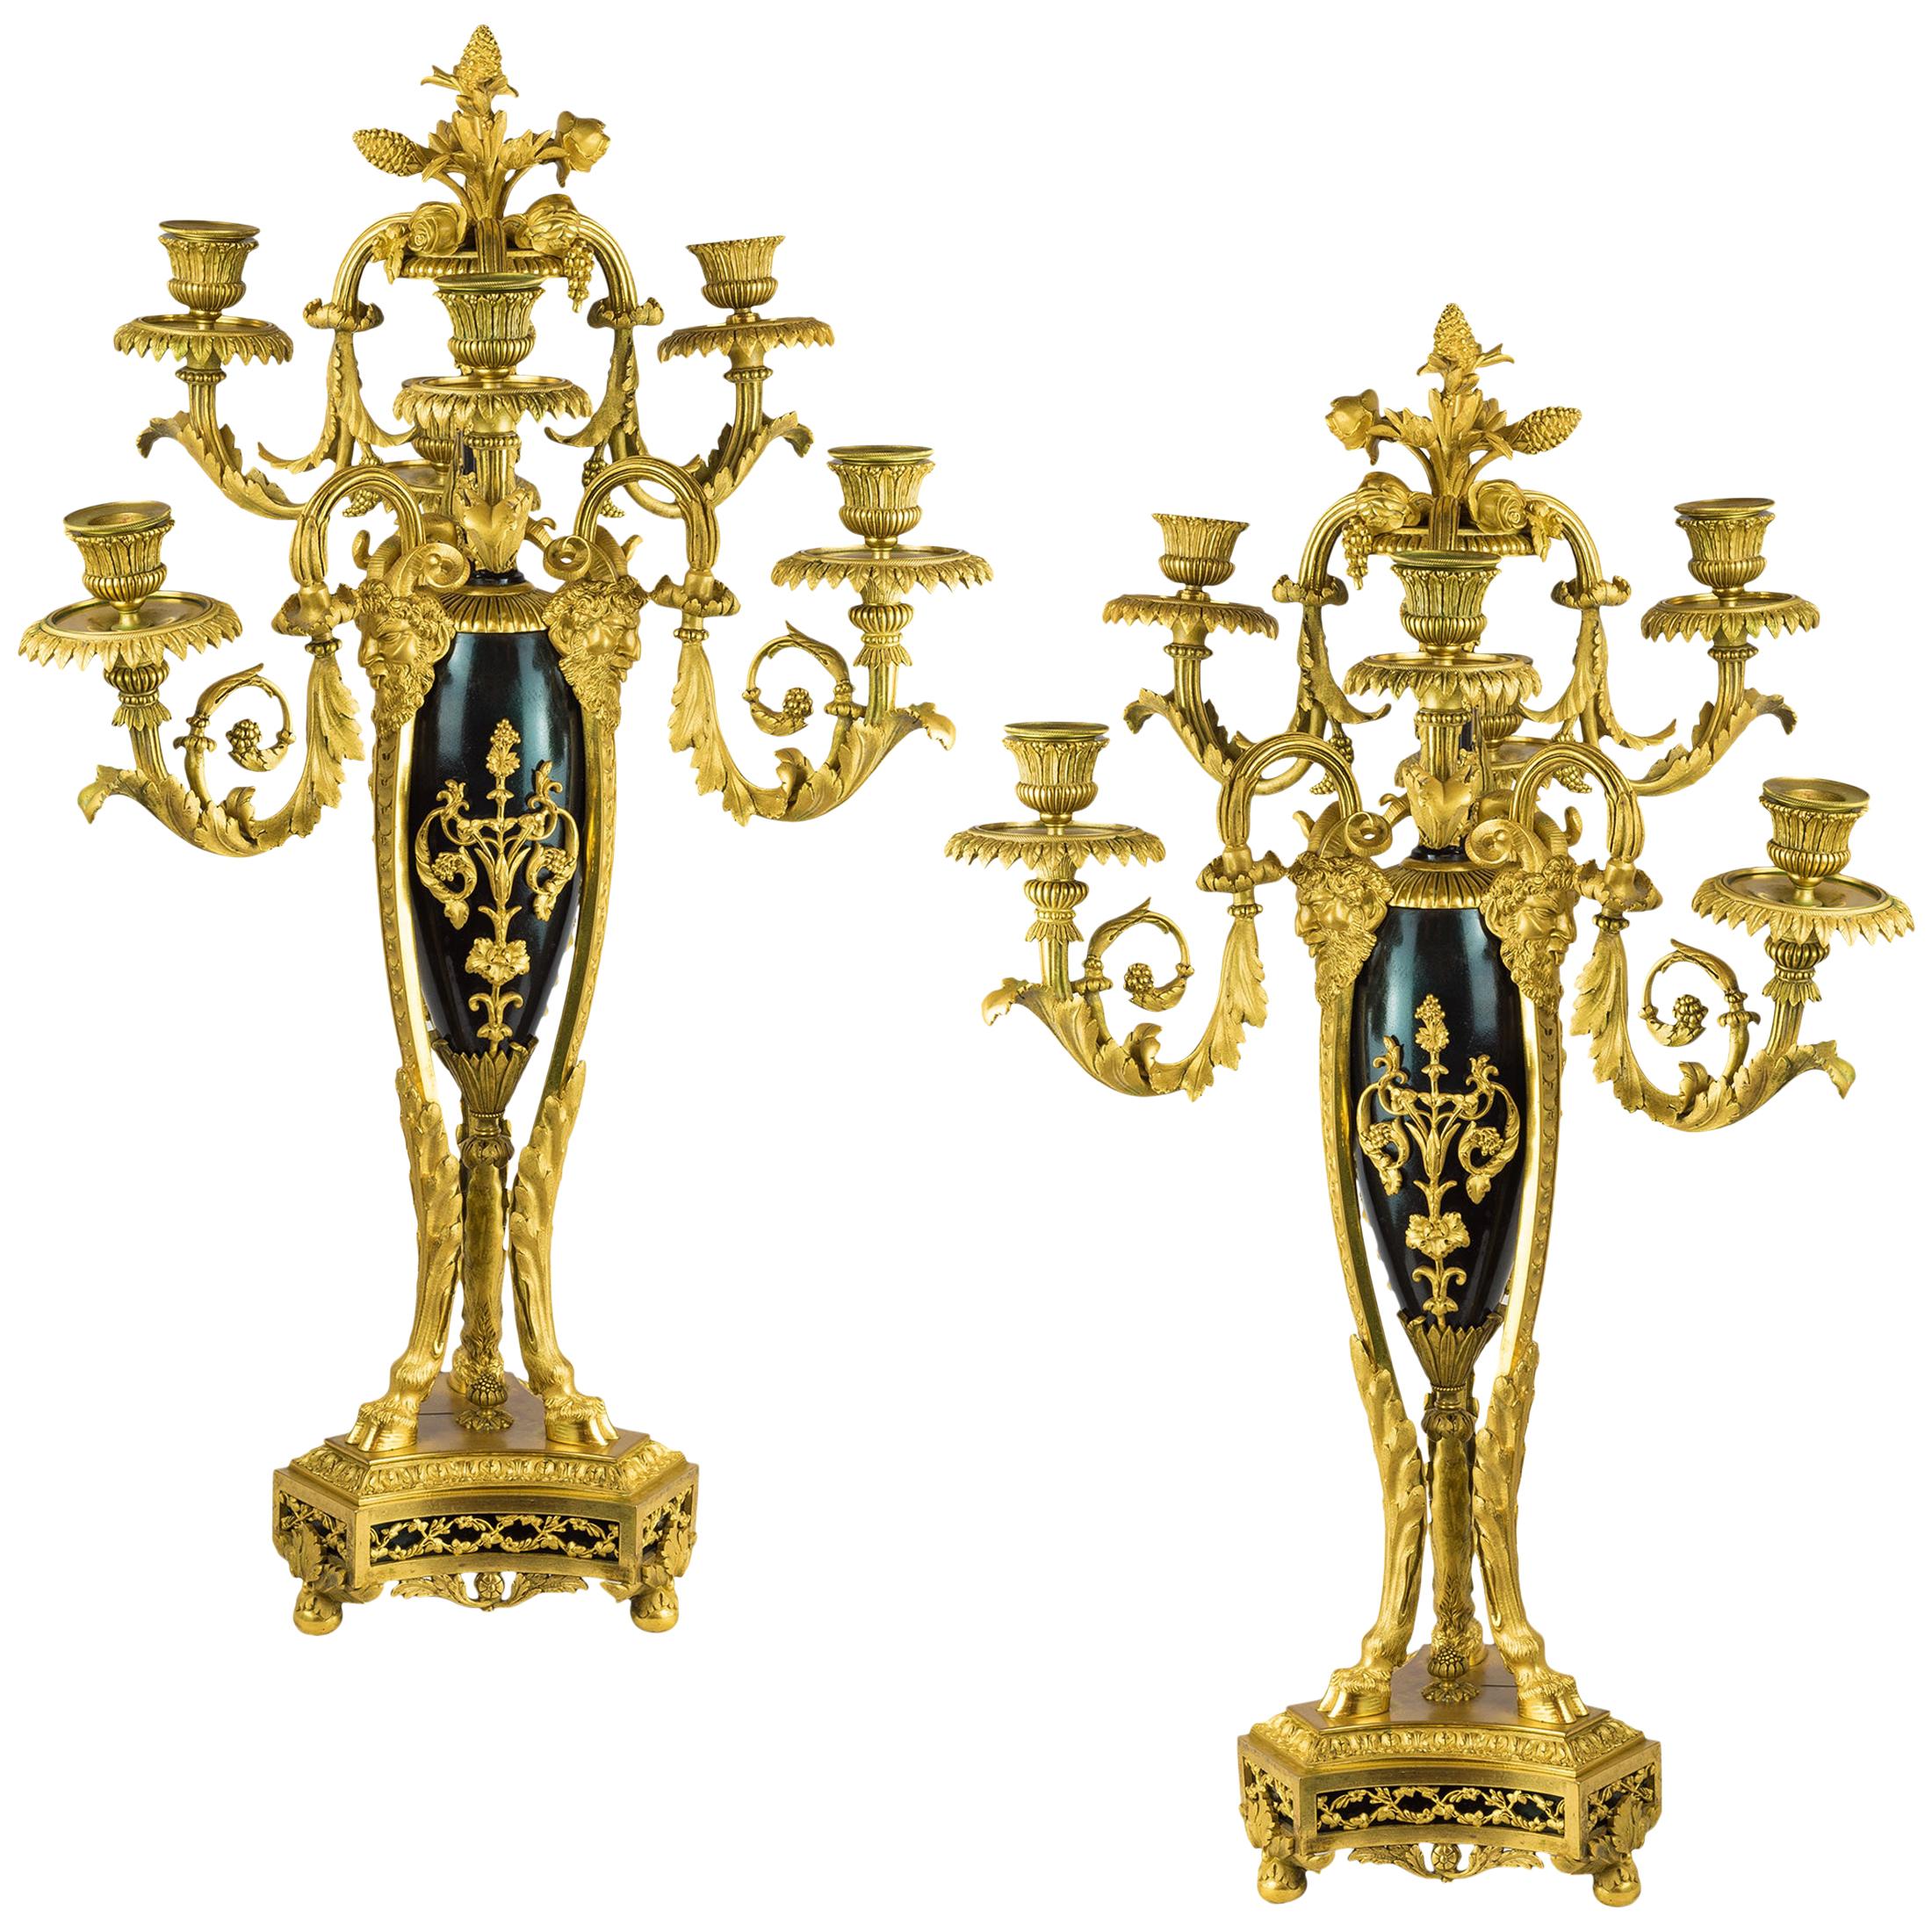 Pair of Napoleon III Gilt-Bronze Six-Light Candelabras Attributed to Beurdeley For Sale